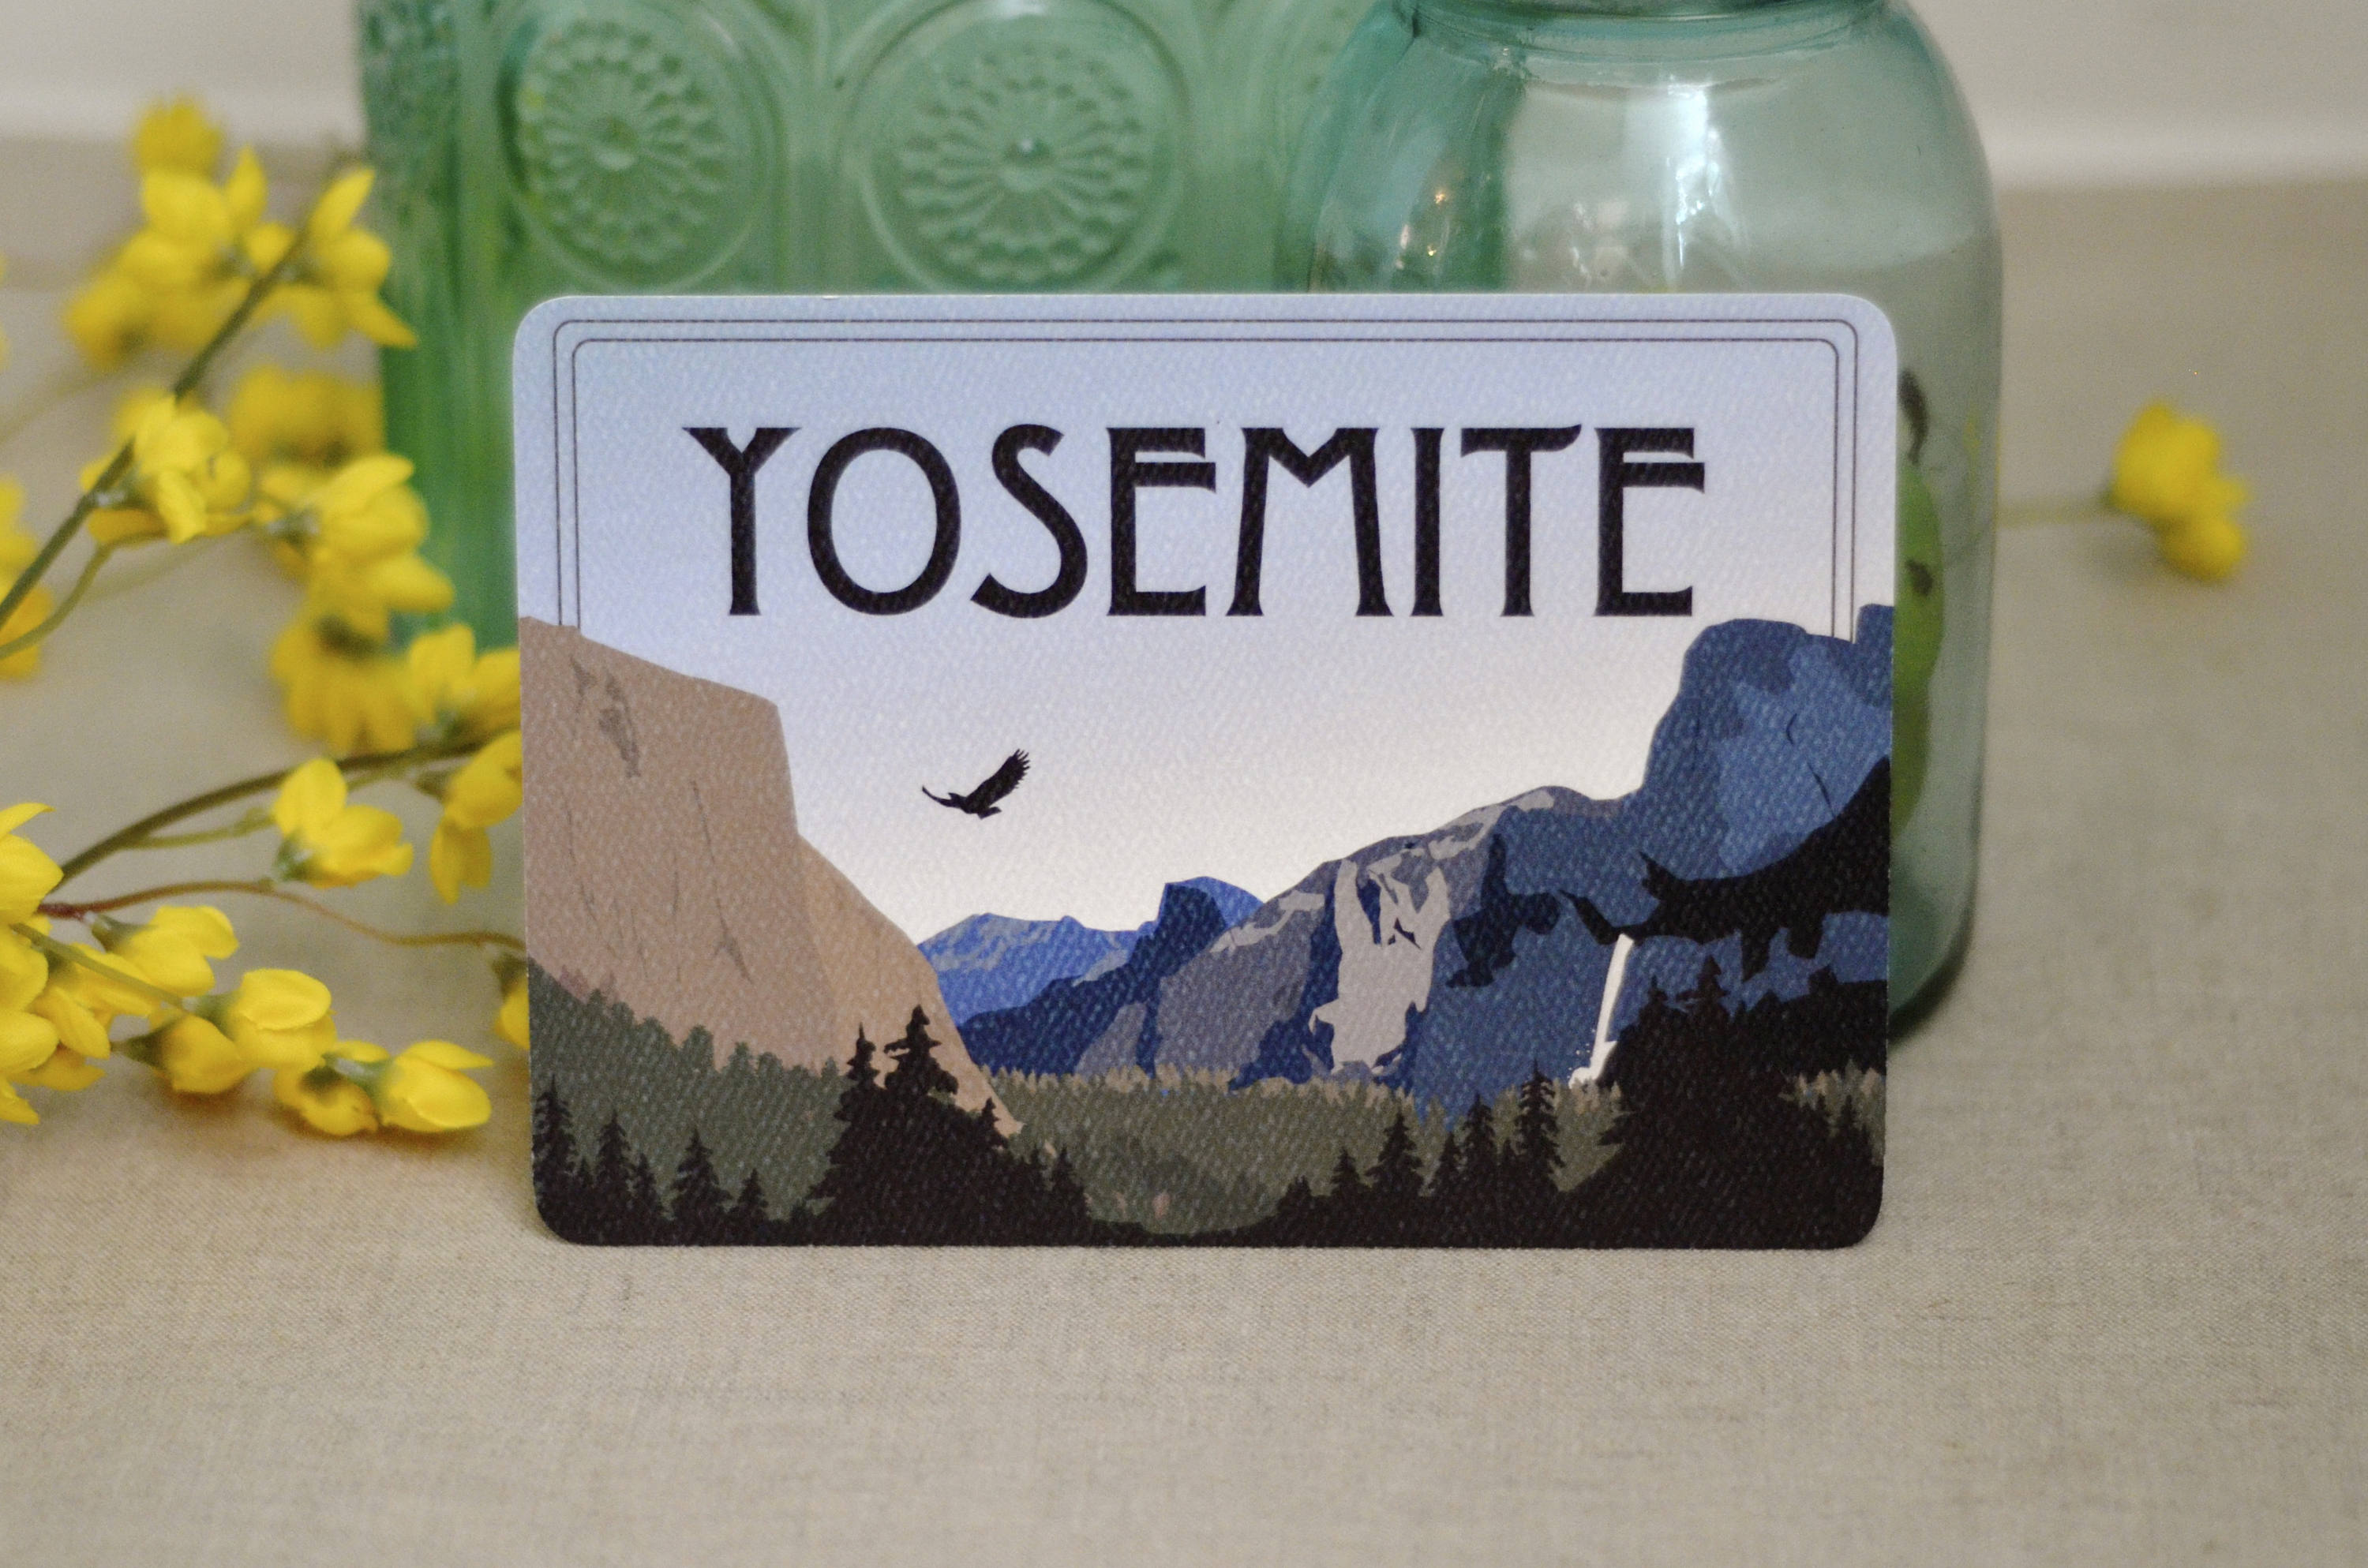 Yosemite Tunnel View Craftsman // Table Numbers / Place Cards for Wedding Reception 5x7 // Summer Mountain Landscape